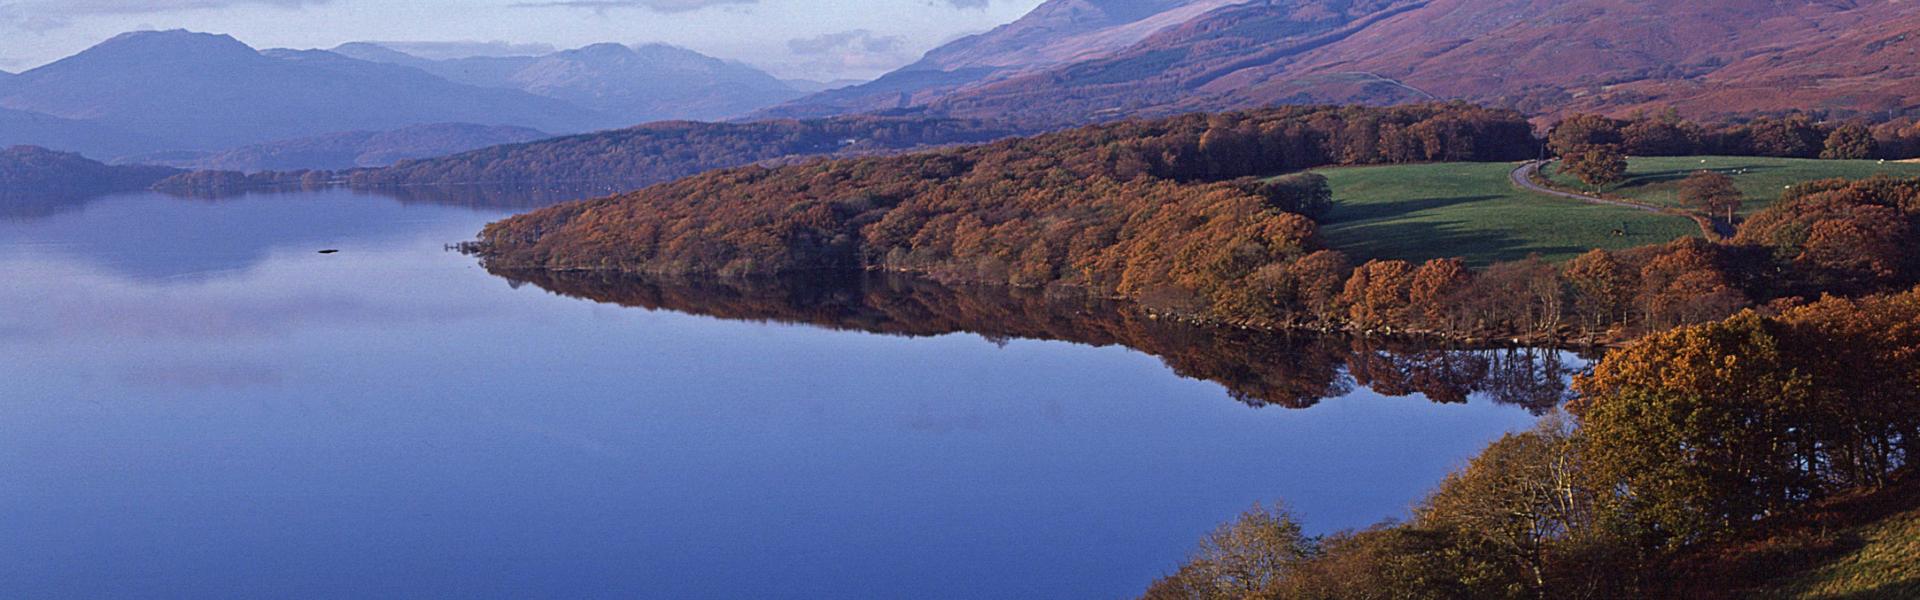 Accommodation & Holiday Cottages in the Loch Lomond & The Trossachs National Park - HomeToGo